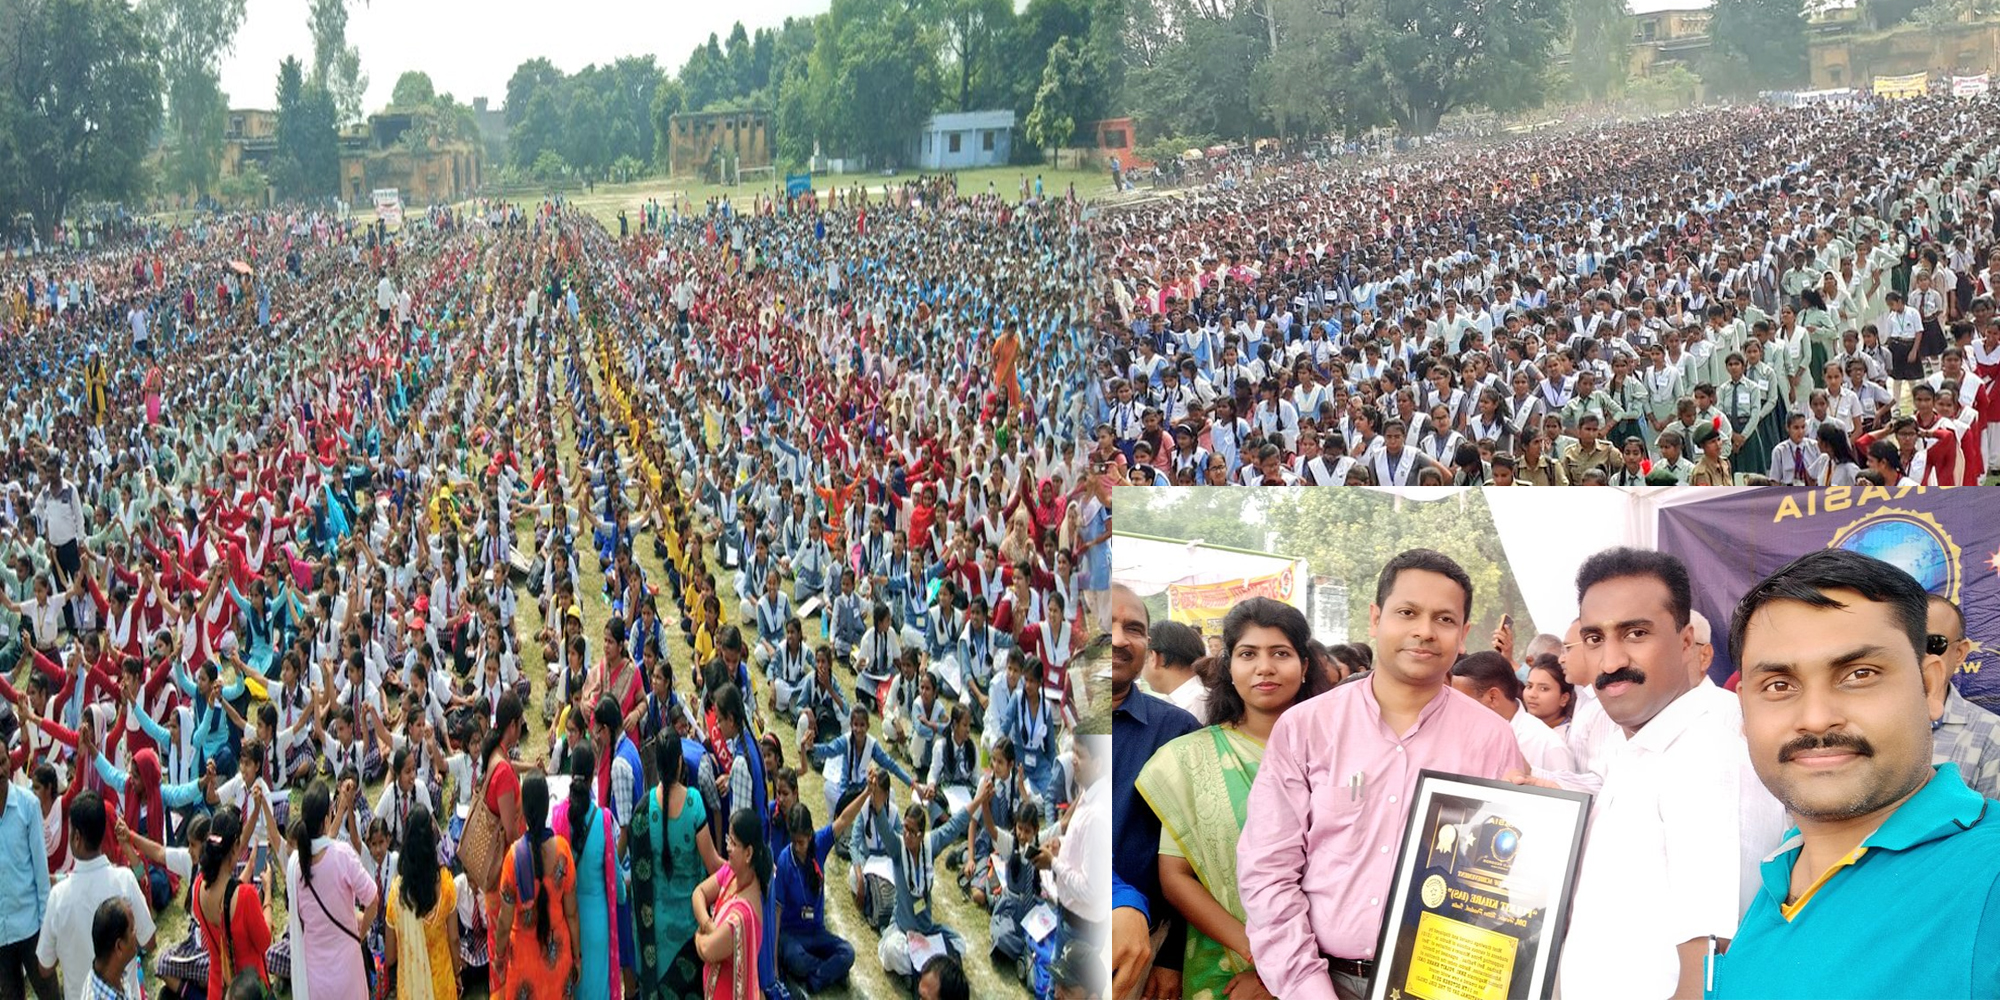 11 Thousand School Girls Made Guinness Book of World Records